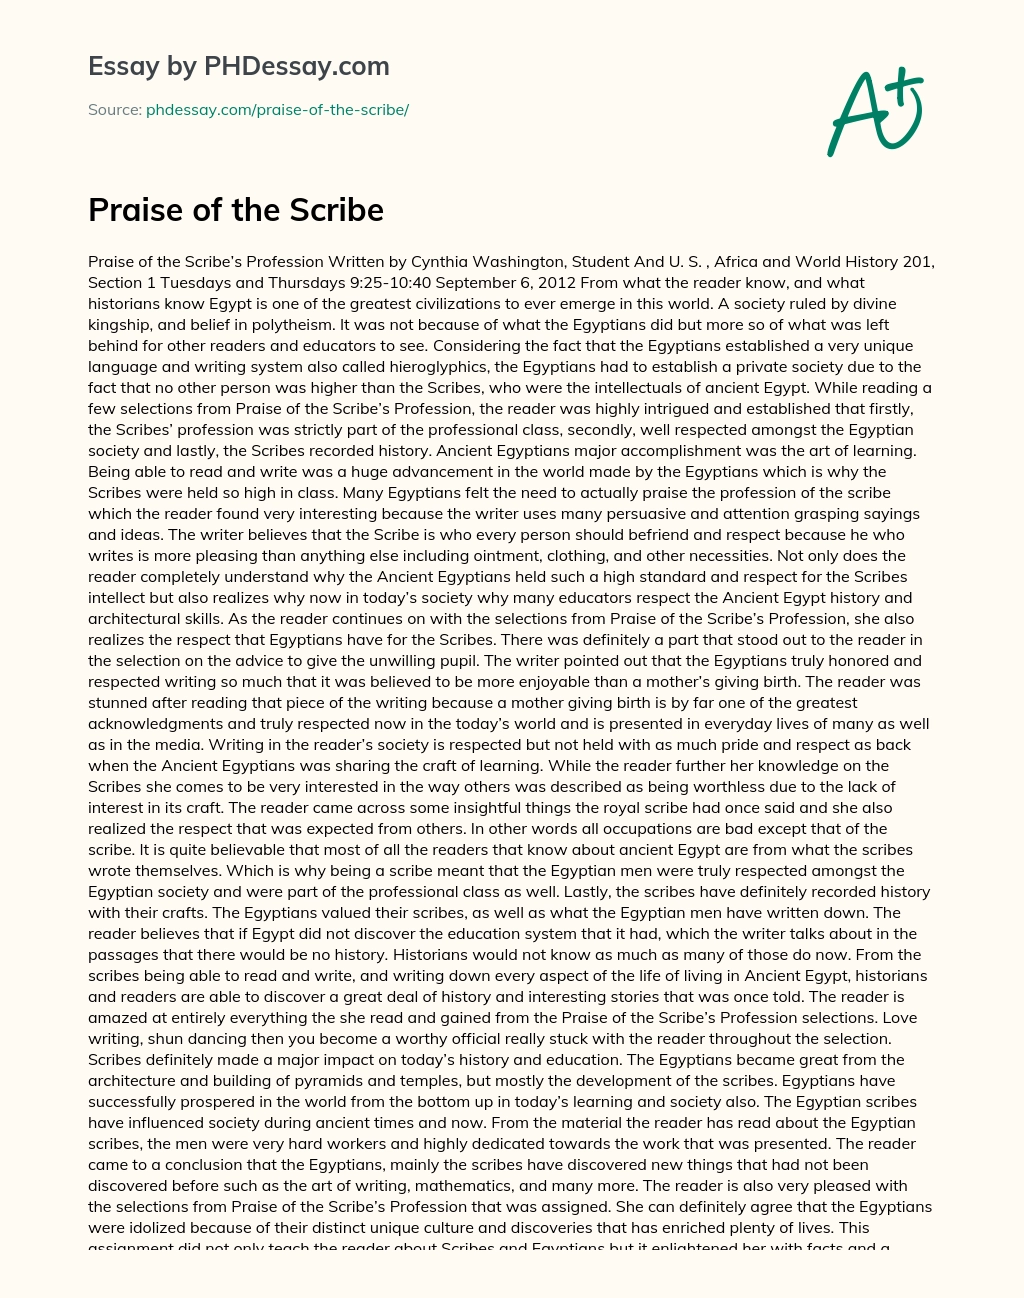 Praise of the Scribe essay